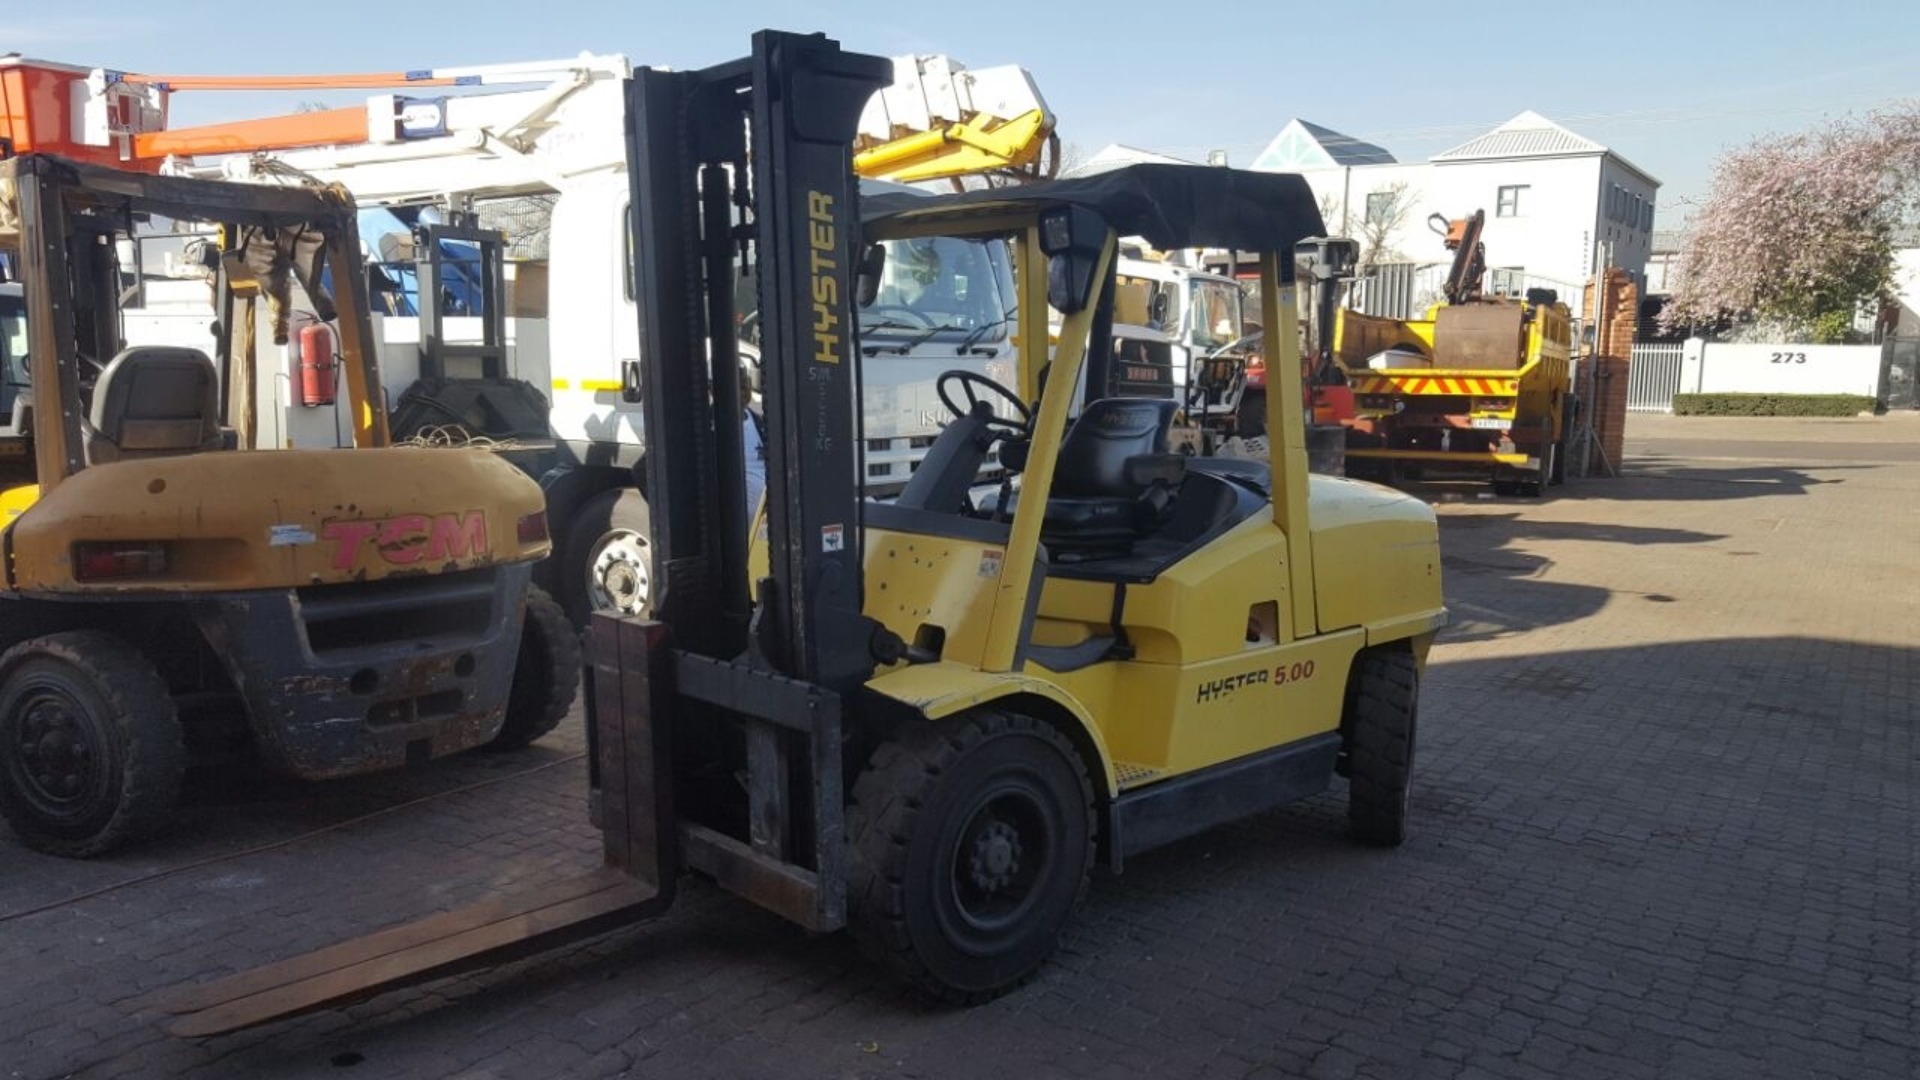 2005 Hyster 5 Ton Hyster Diesel Forklift Forklifts Machinery For Sale In Gauteng R 265 000 On Truck Trailer